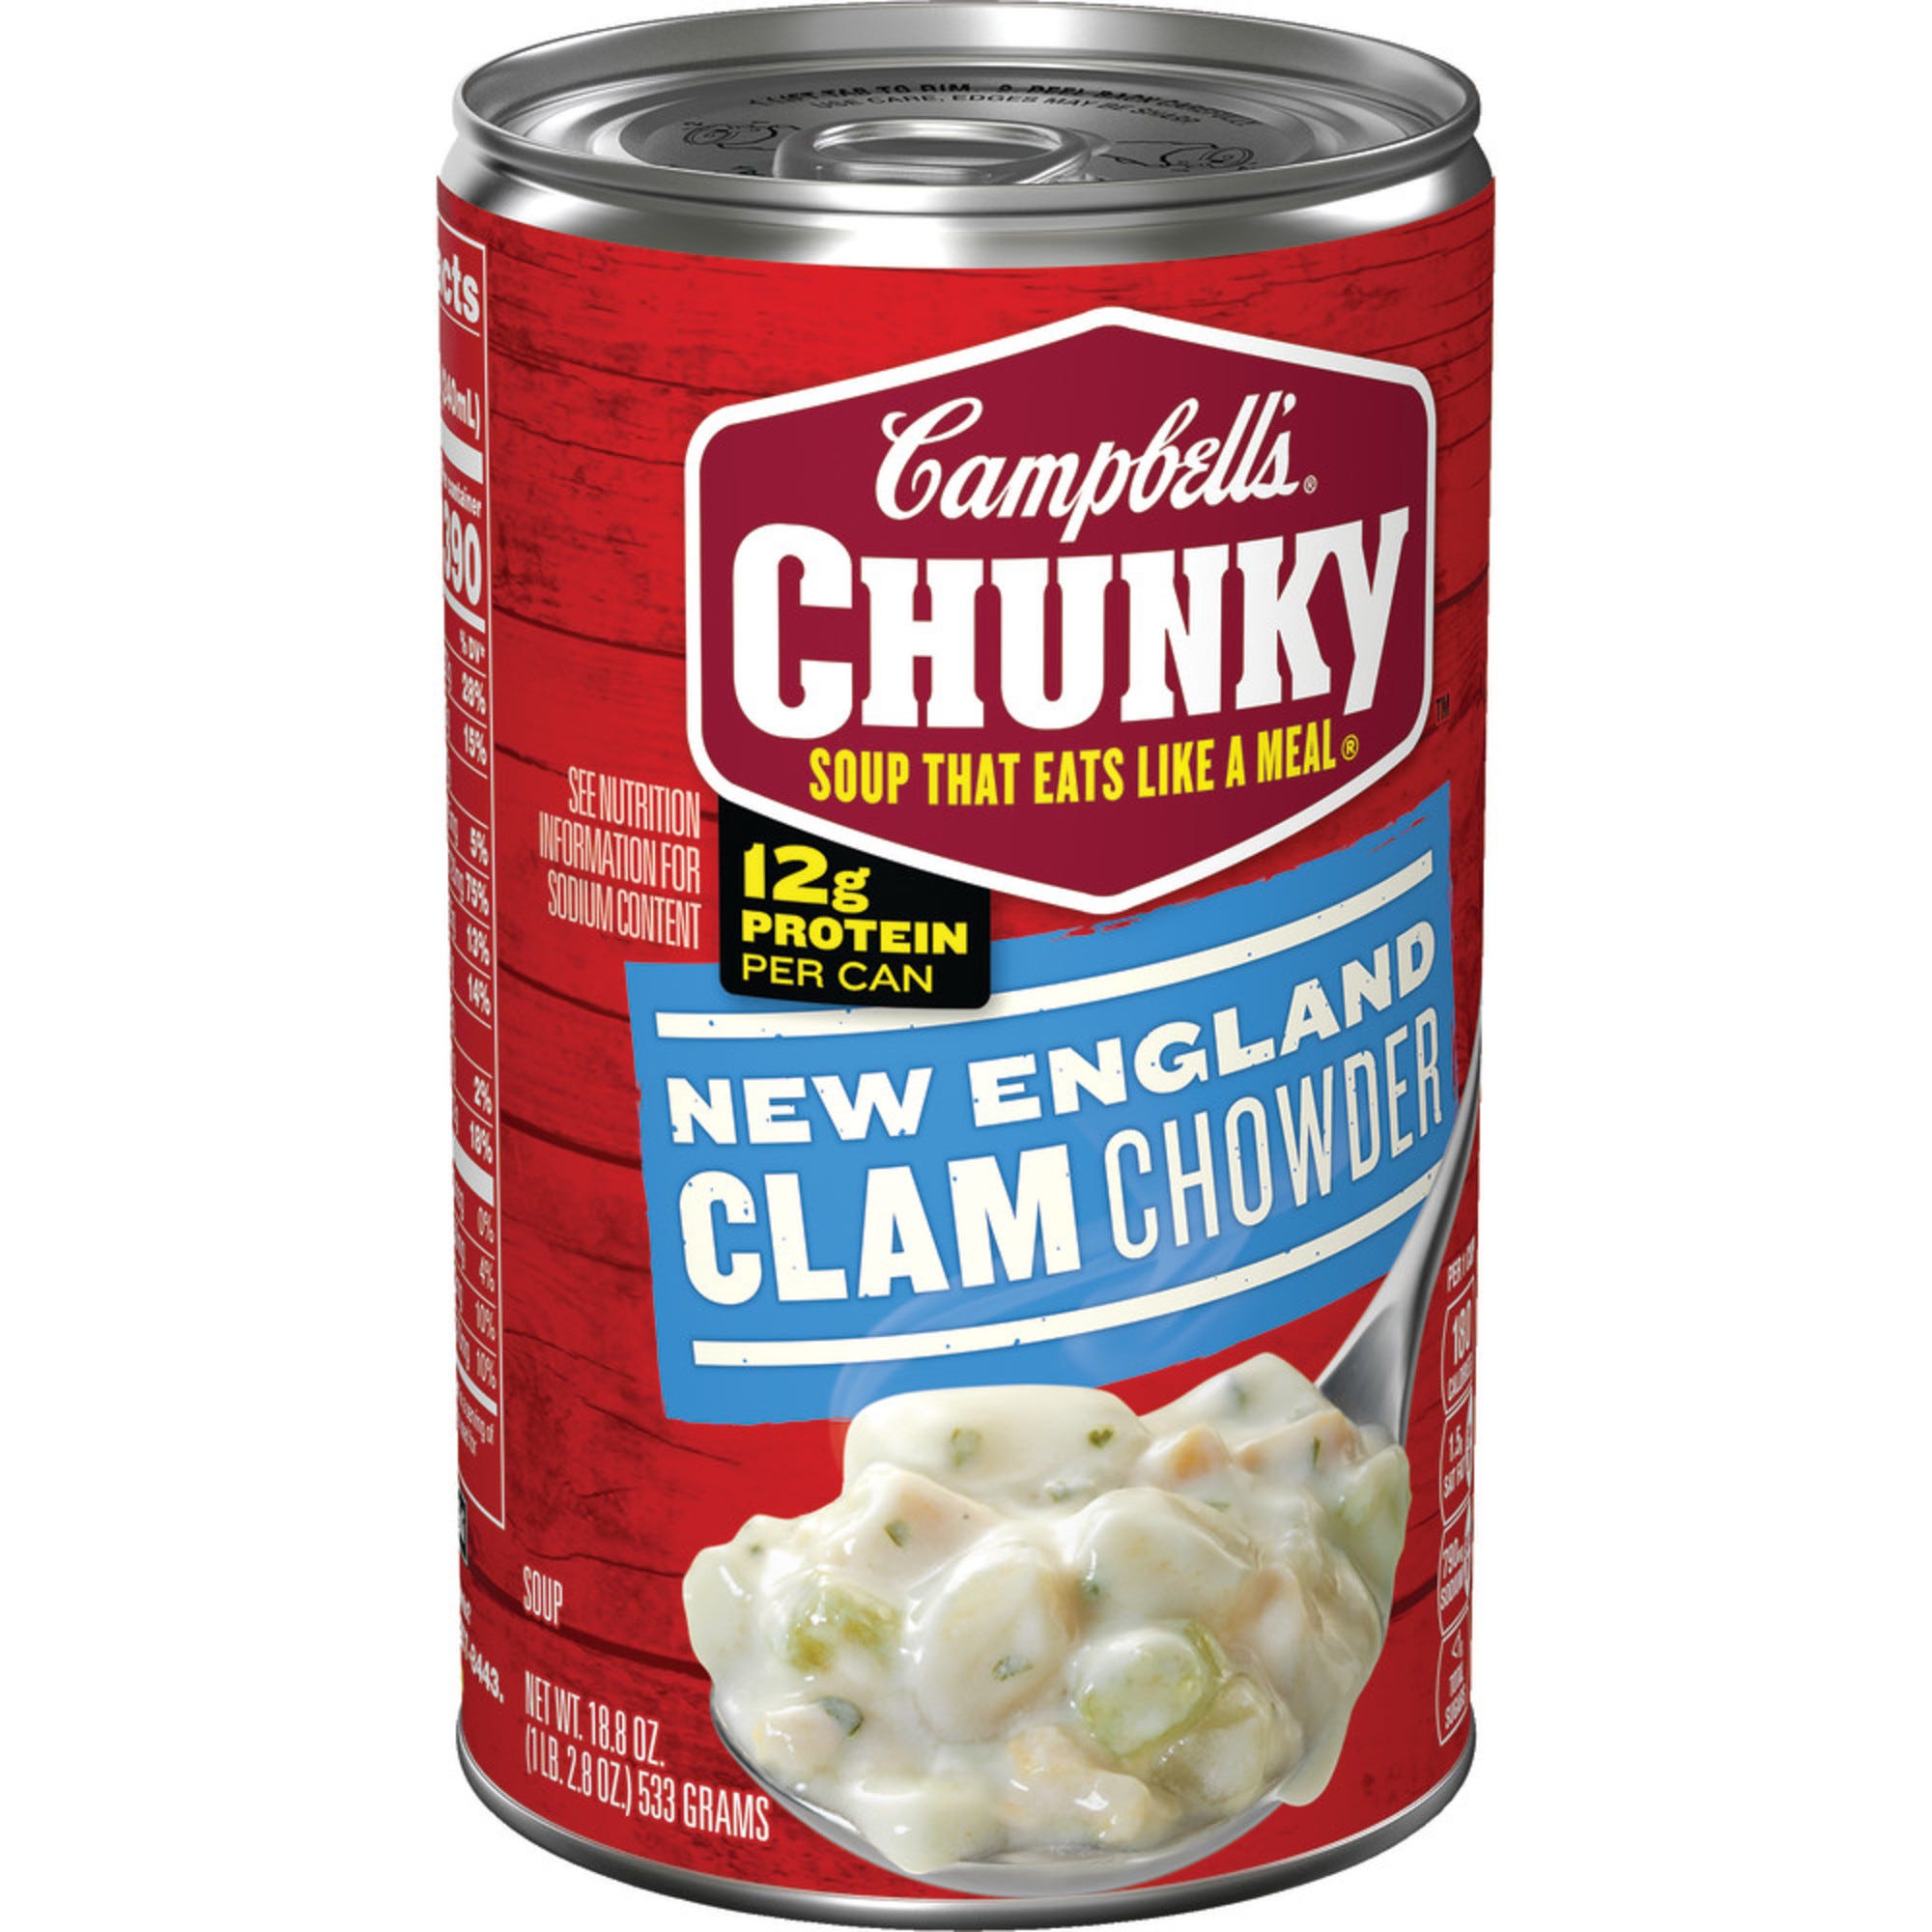 Campbell's Chunky Soup, New England Clam Chowder - 18.8 oz